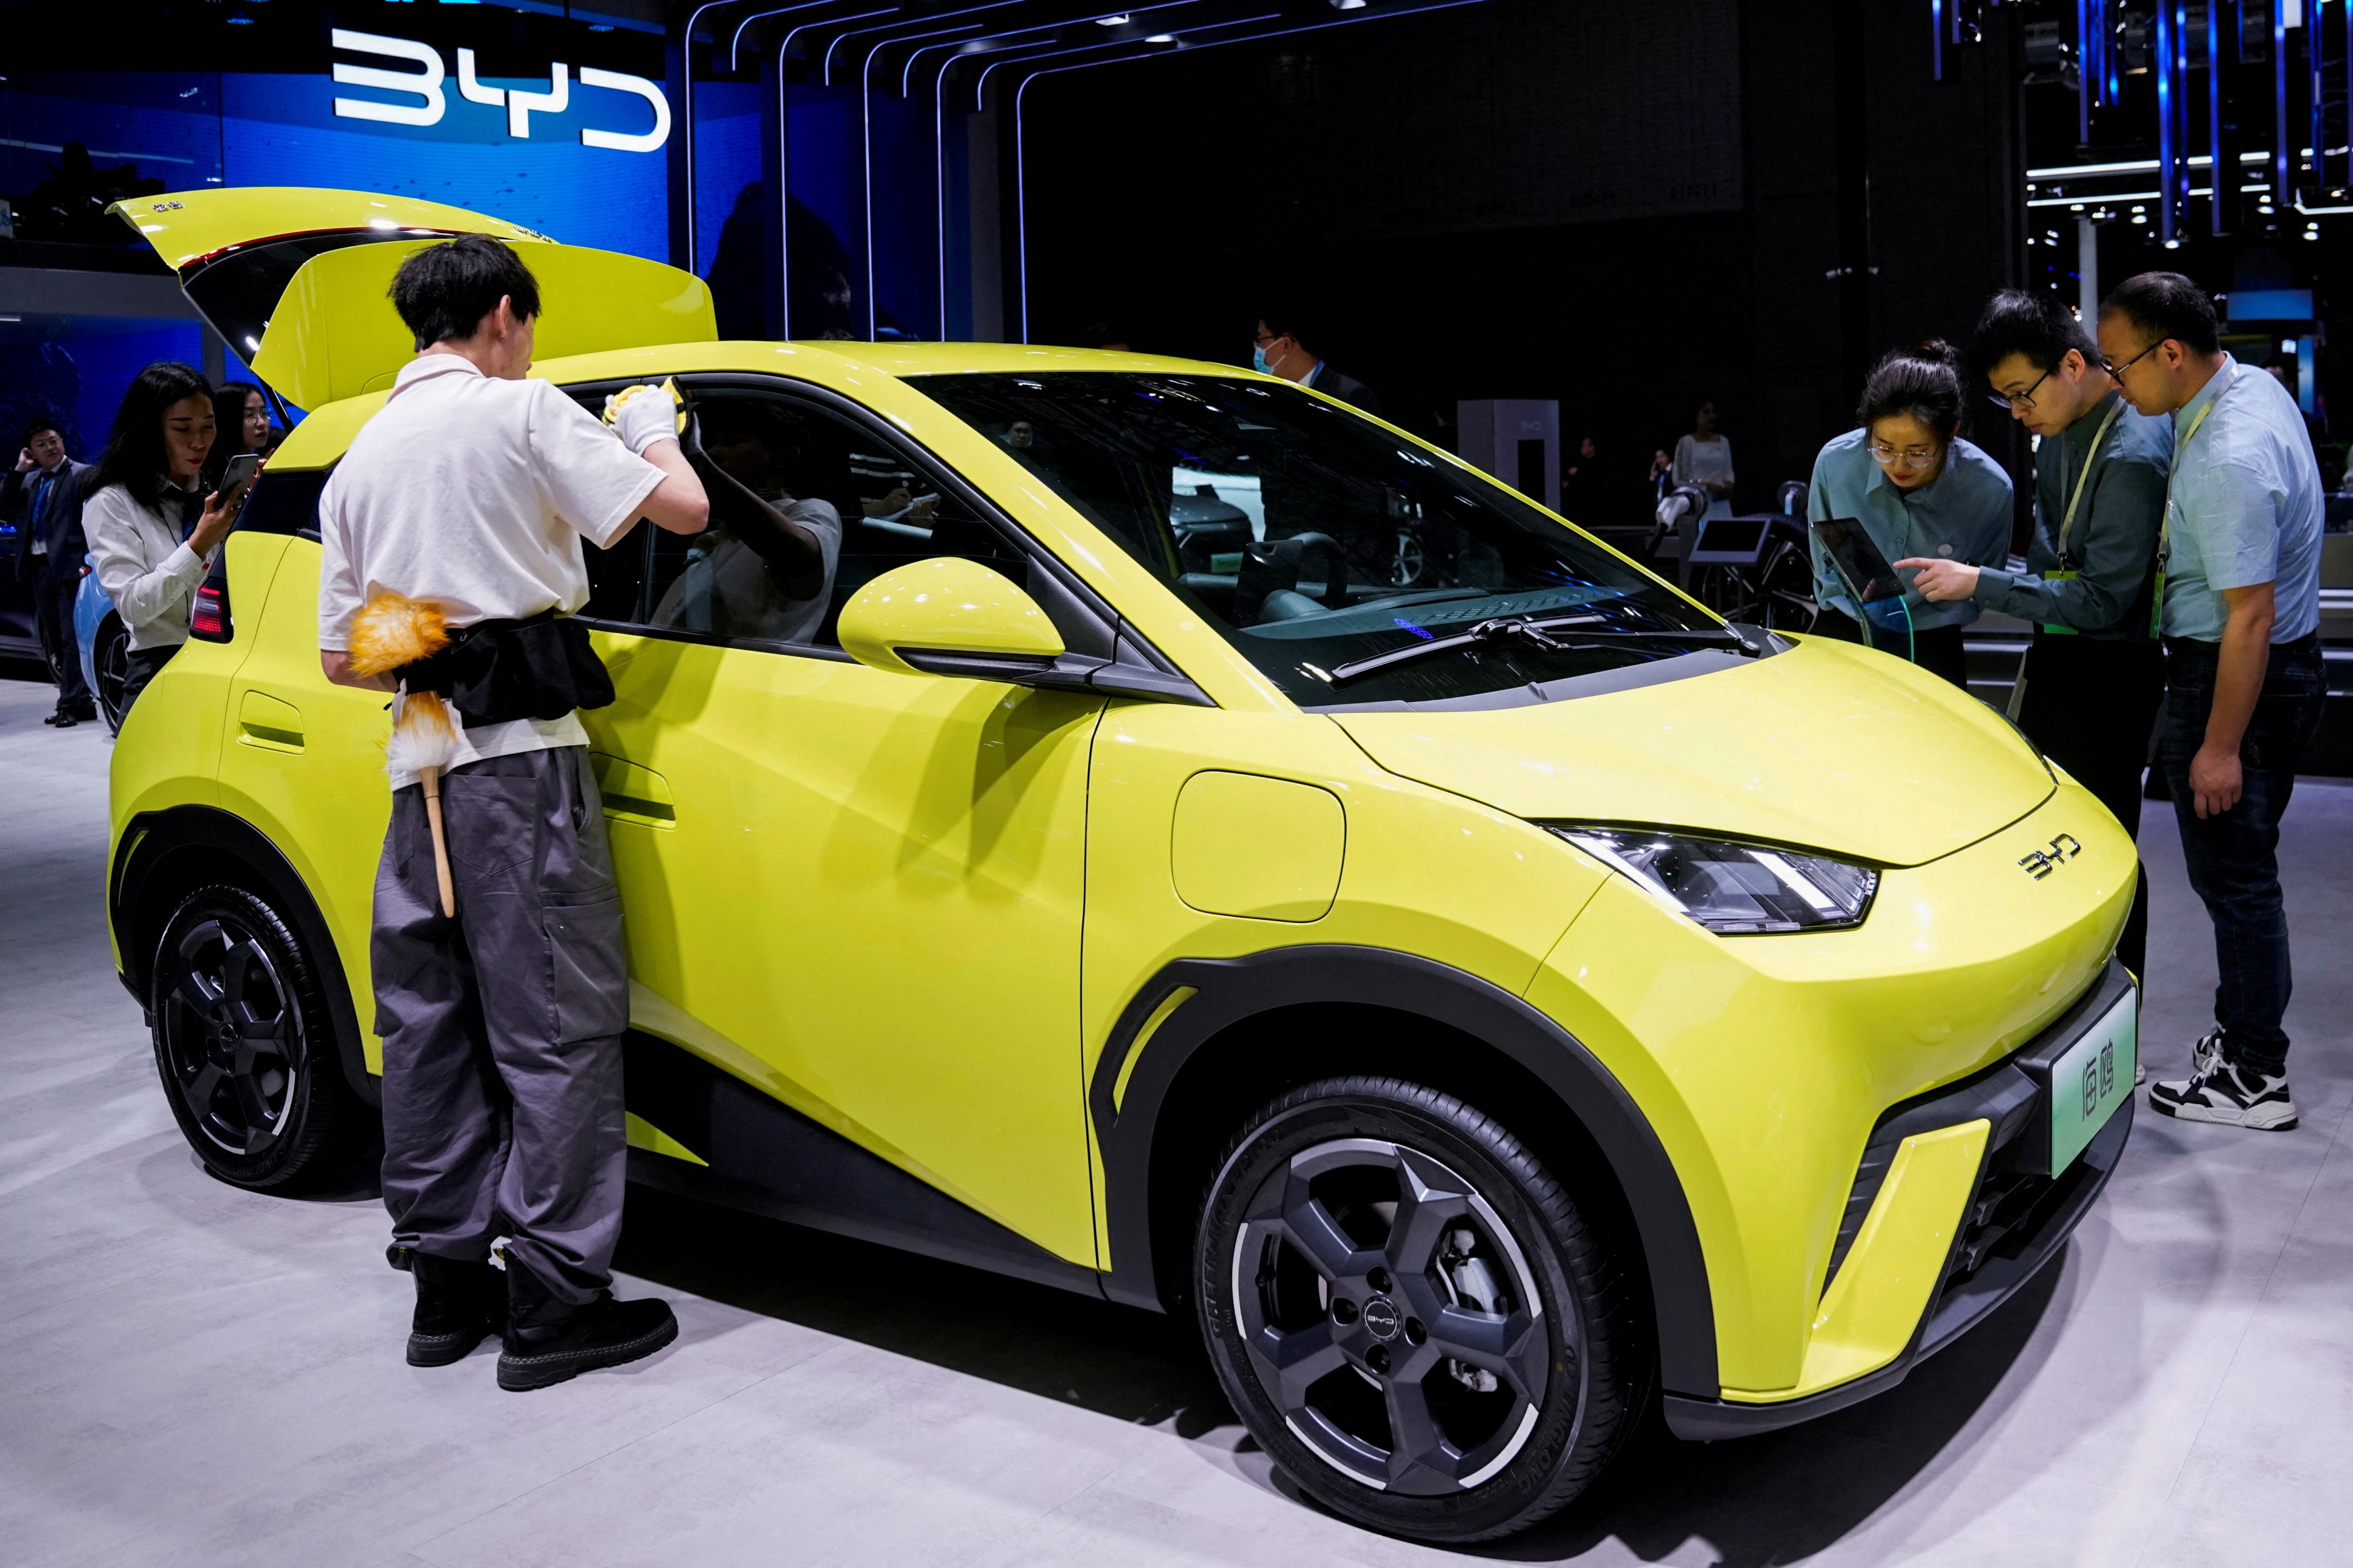 BYD has cut the price of the Seagull hatchback, its most-affordable EV, by another 5 per cent to 69,800 yuan. Photo: Reuters